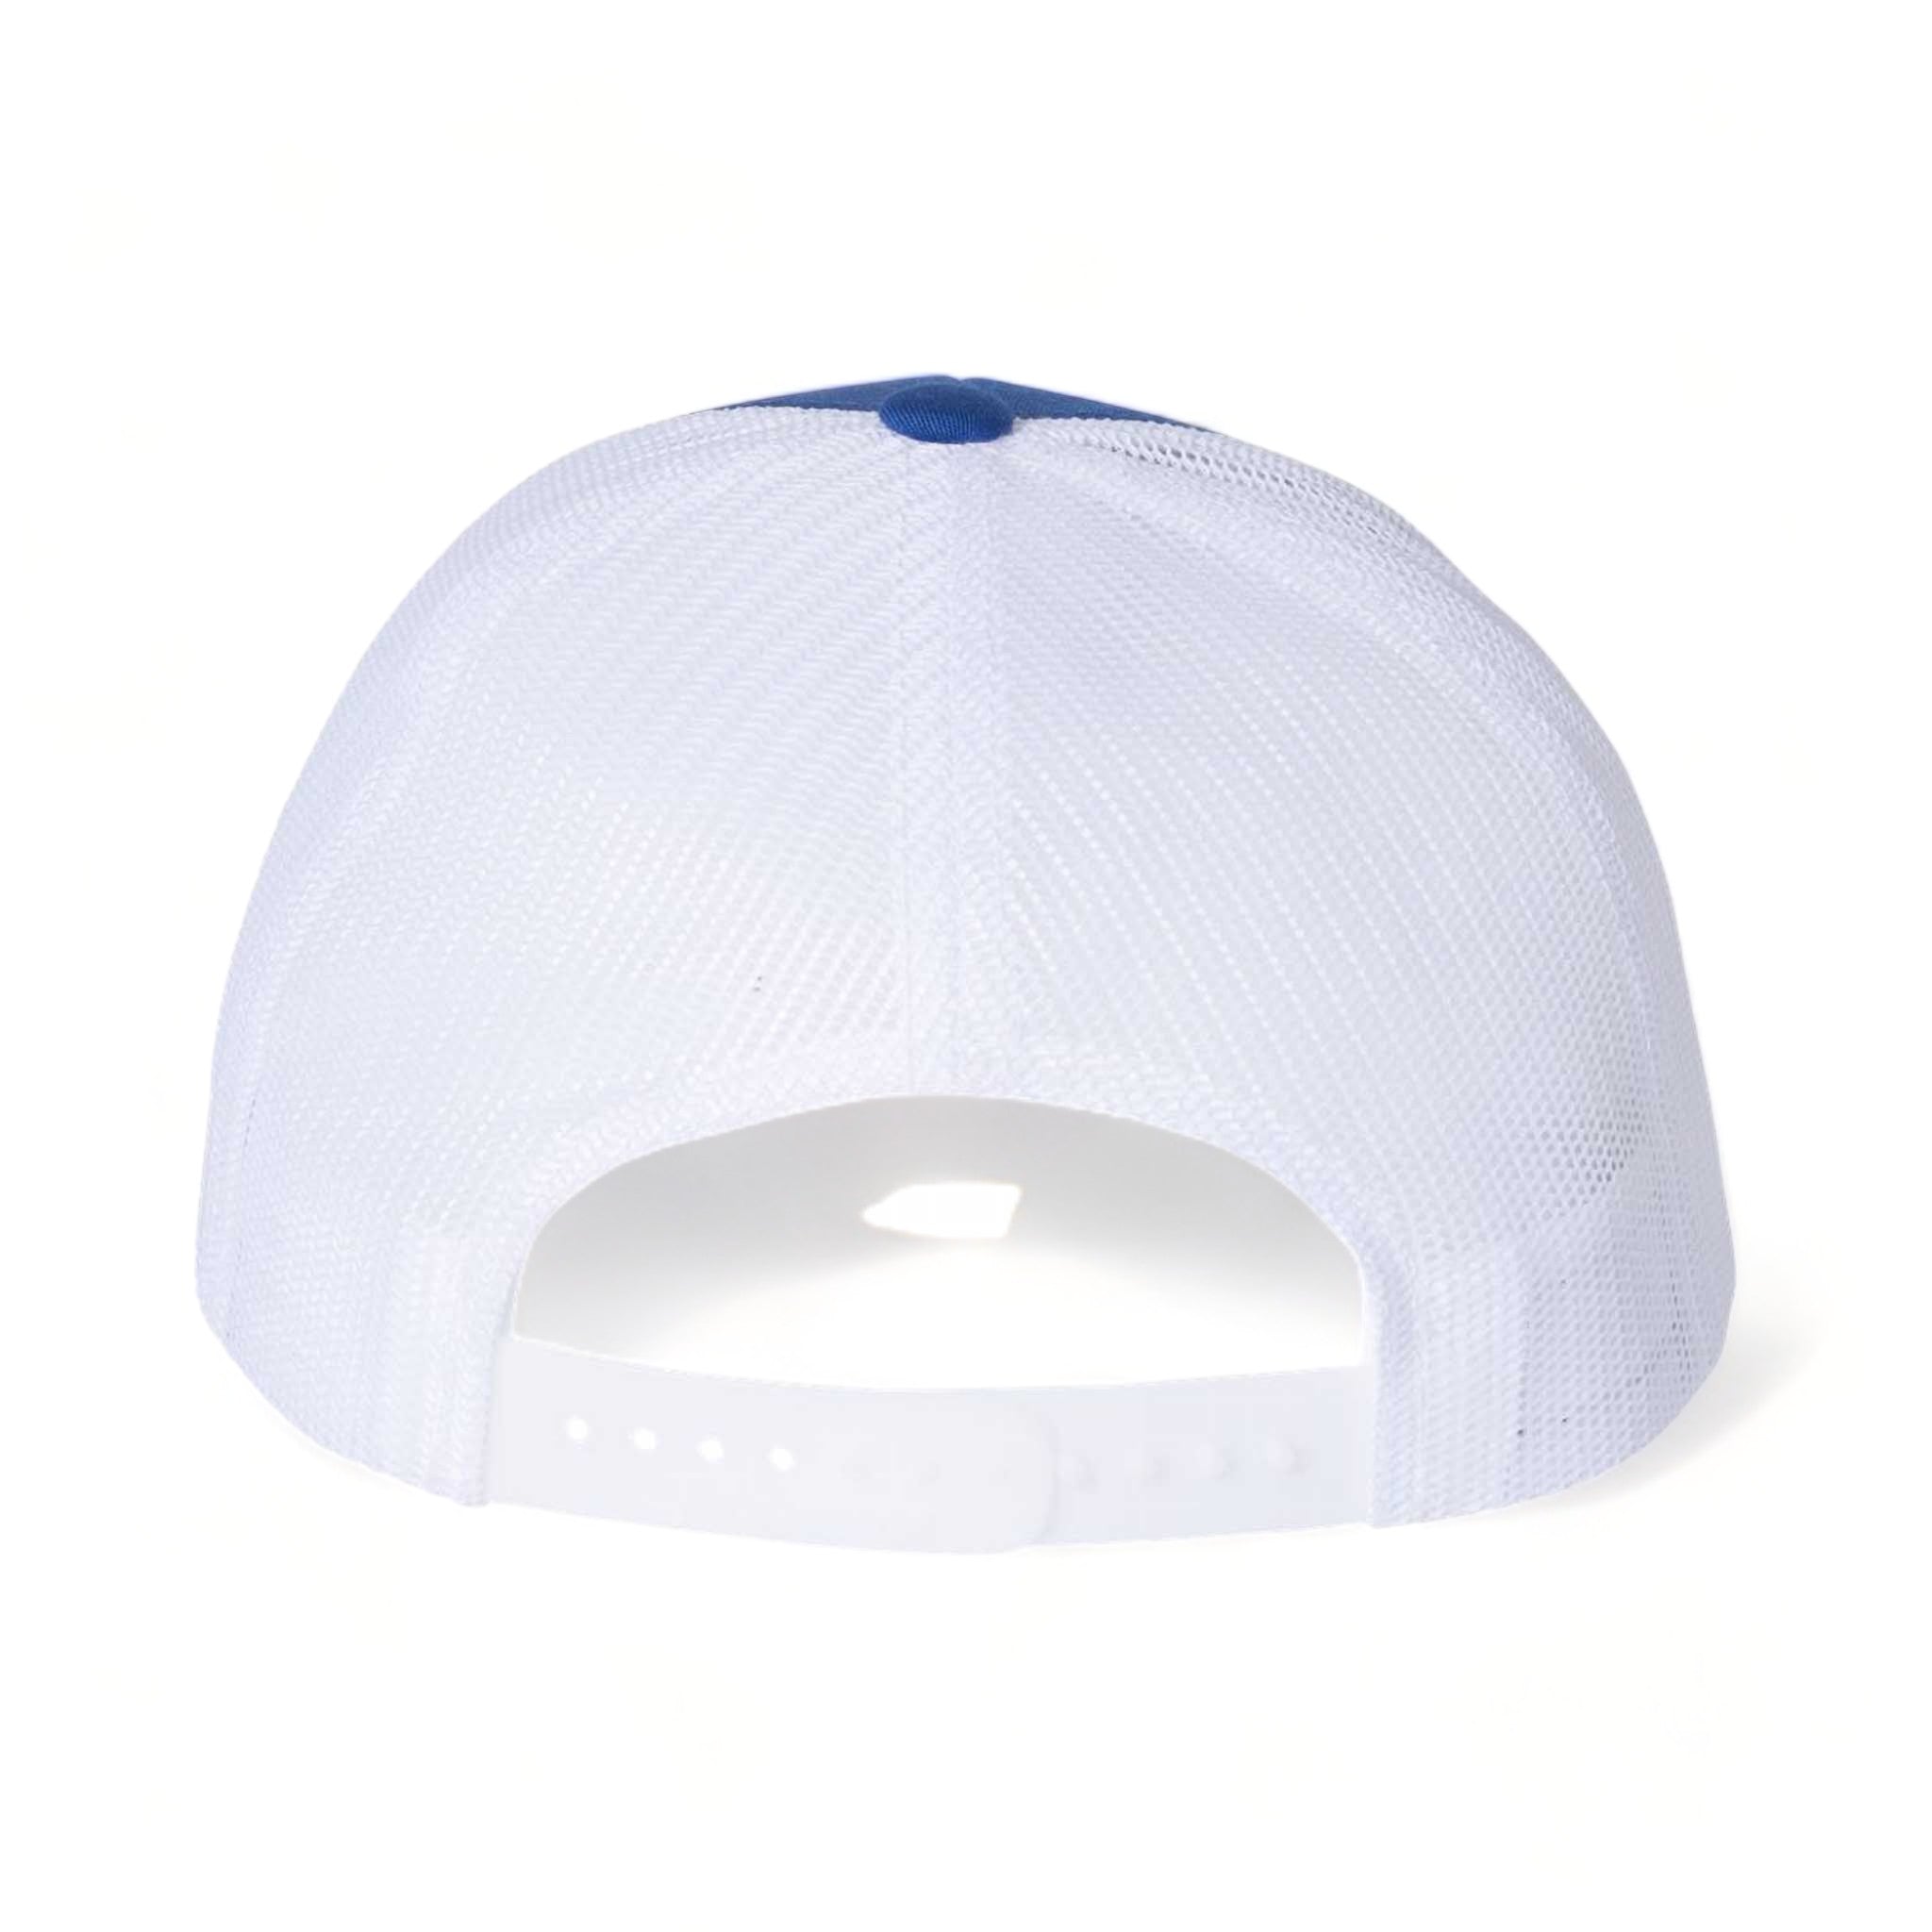 Back view of Richardson 115 custom hat in royal and white